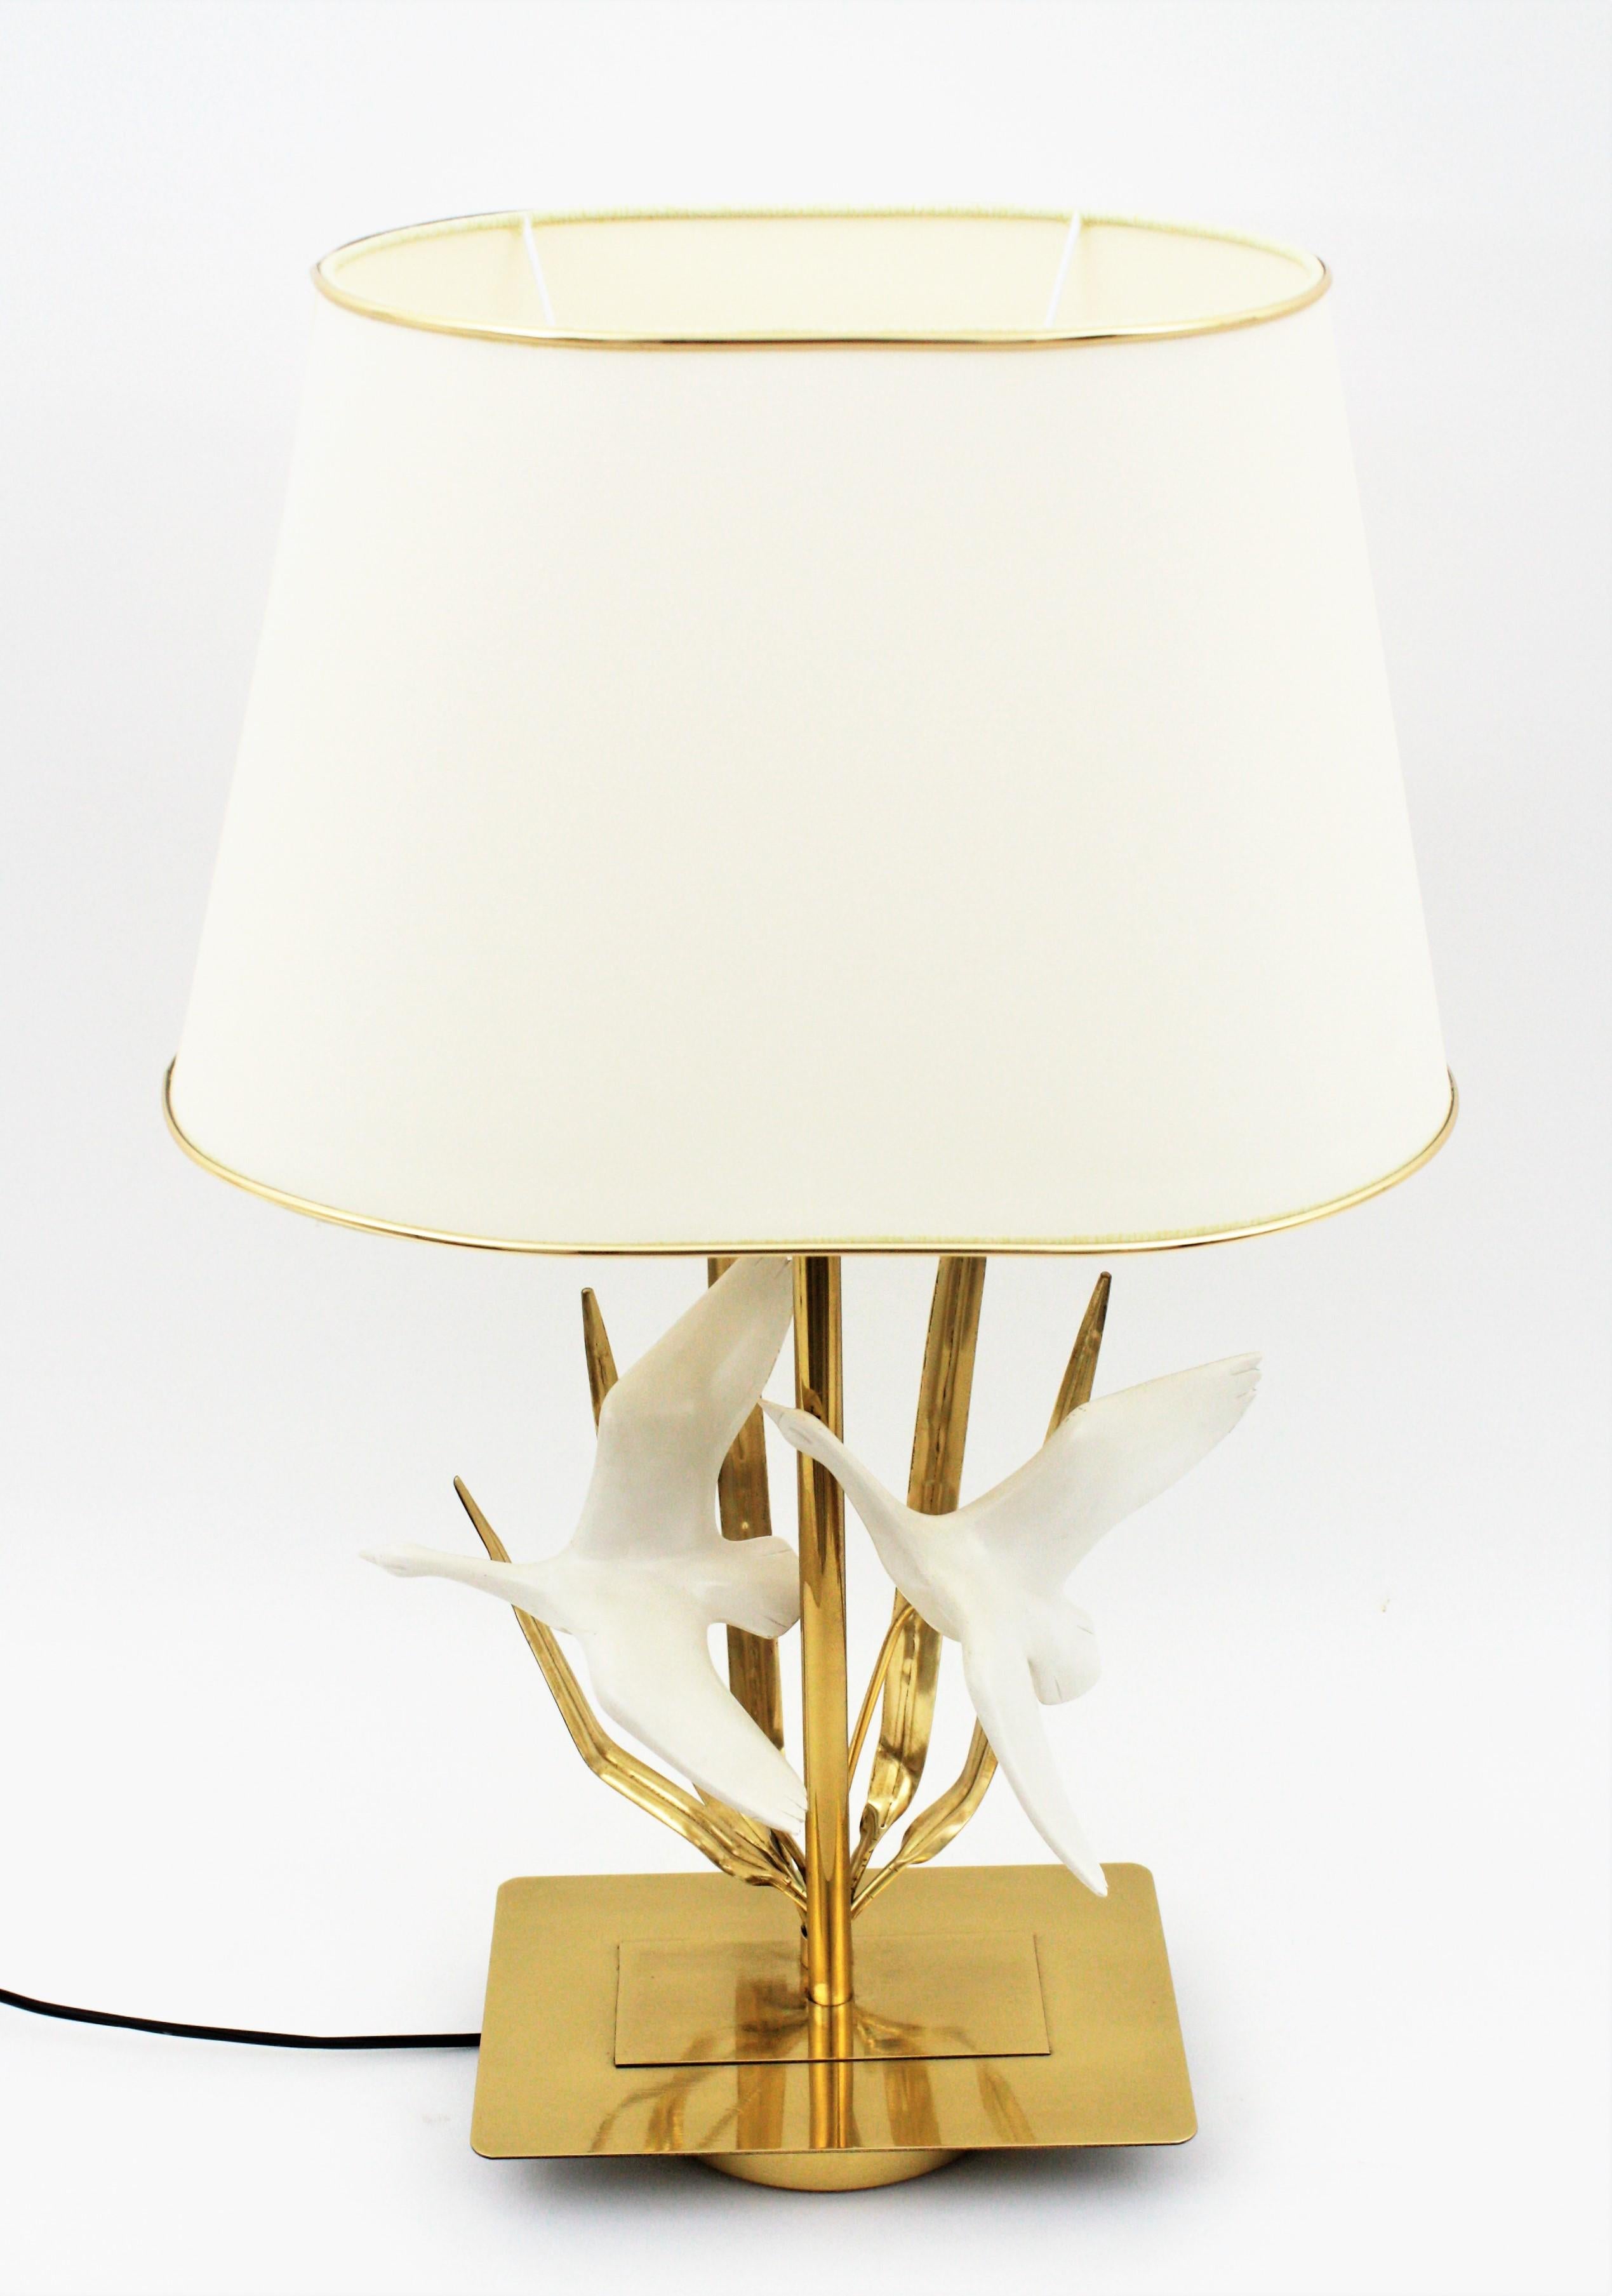 French Midcentury Brass Table Lamp with Flying Birds Motif For Sale 4